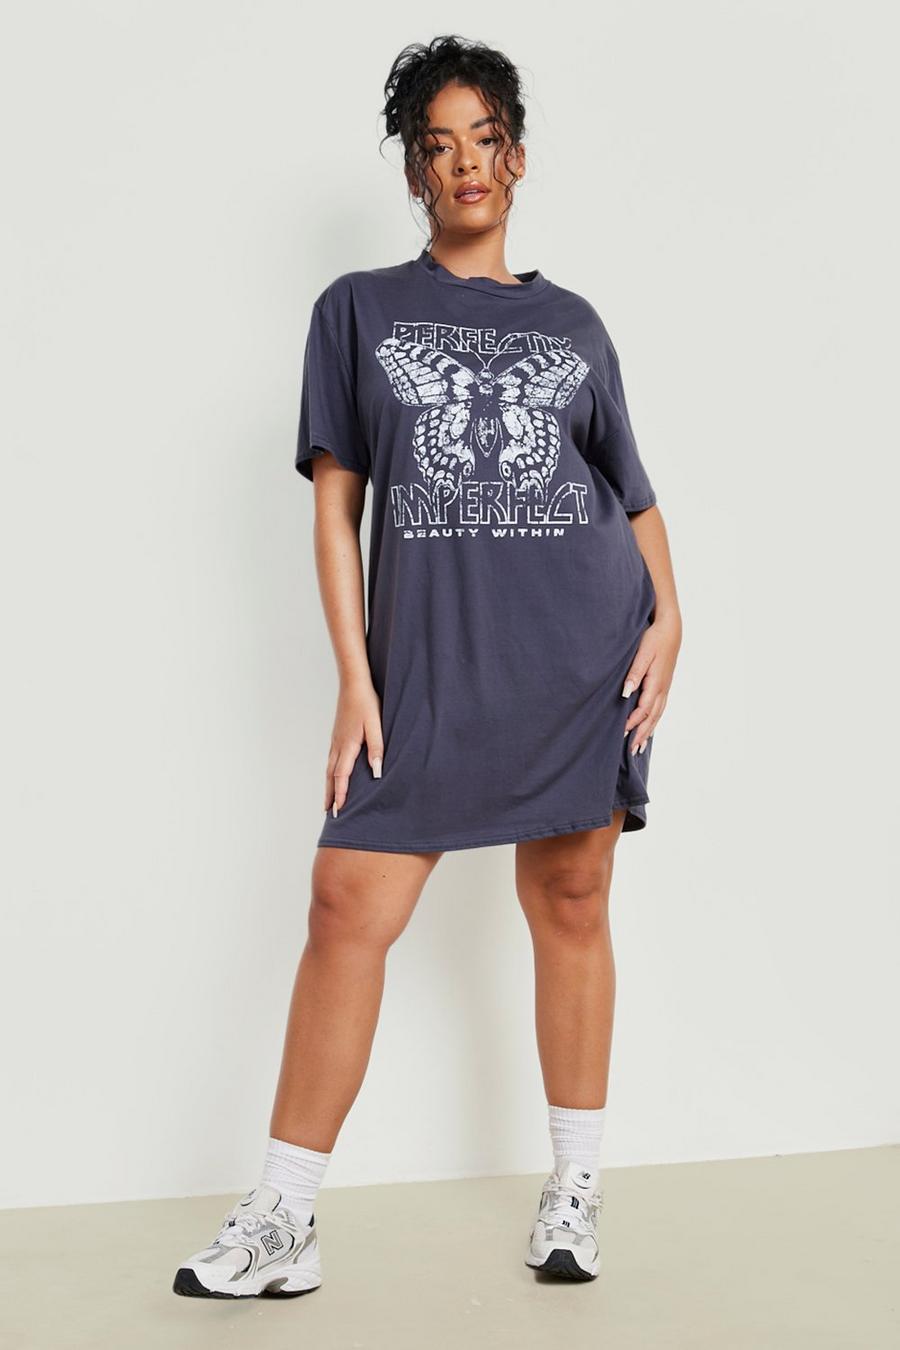 Vestito T-shirt Plus Size con slogan Perfectly Imperfect, Charcoal gris image number 1